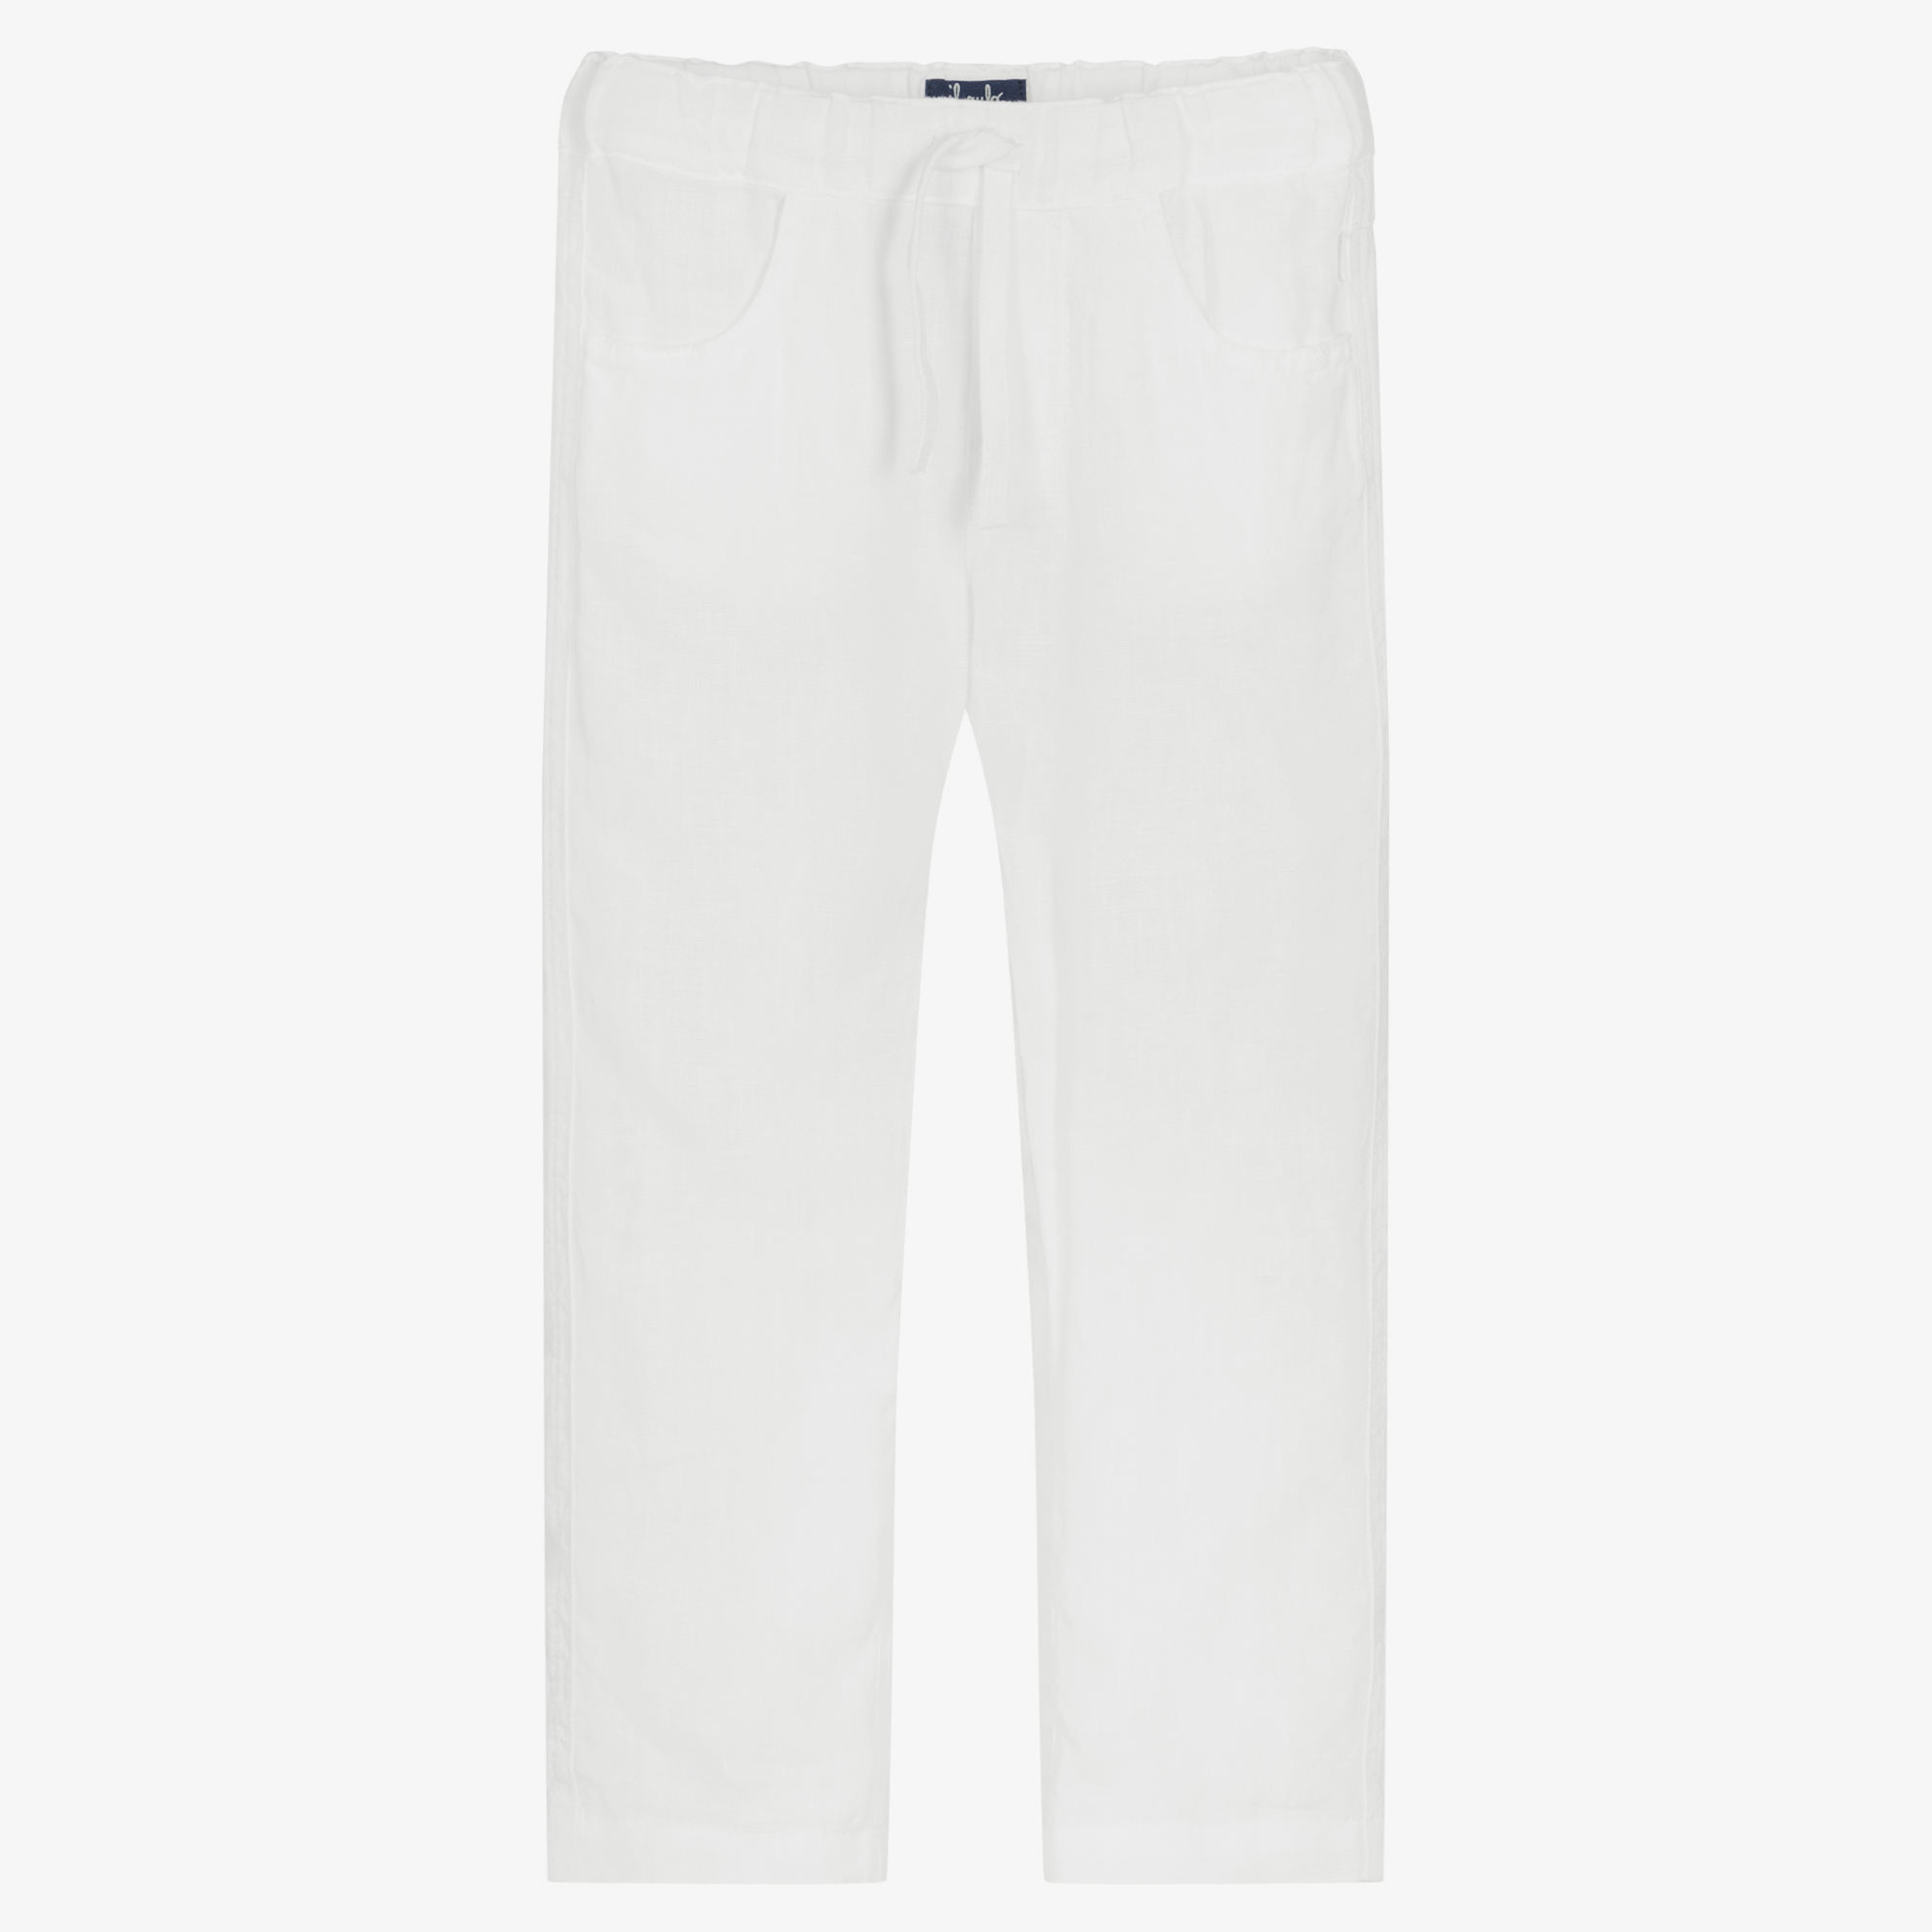 Shop Latest Off White Boys Linen Blend Outerwear Pants Online in India   CubMcPaws